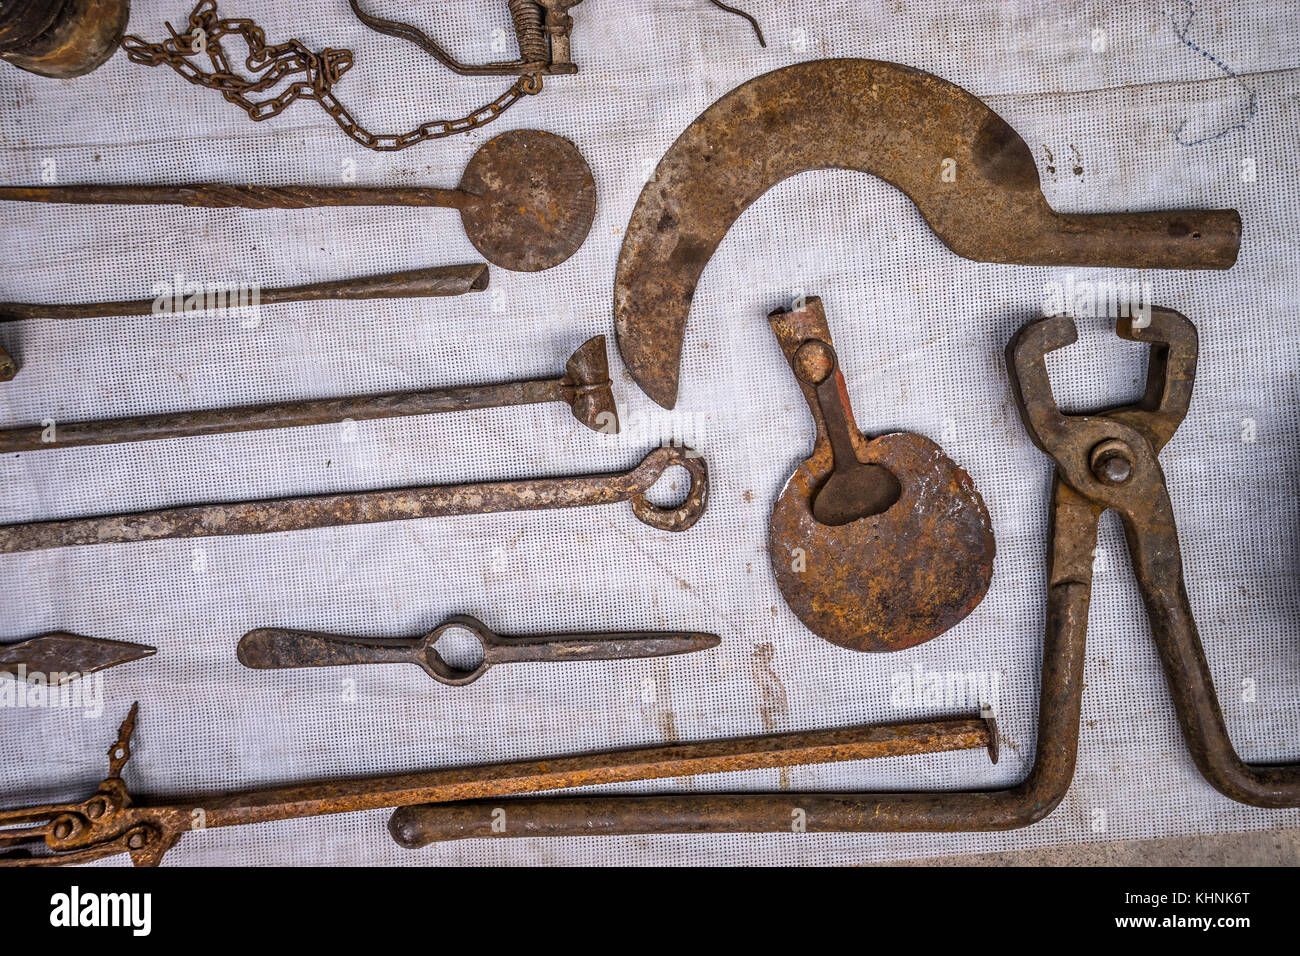 vintage rusty tools in the Mexican flea market Stock Photo